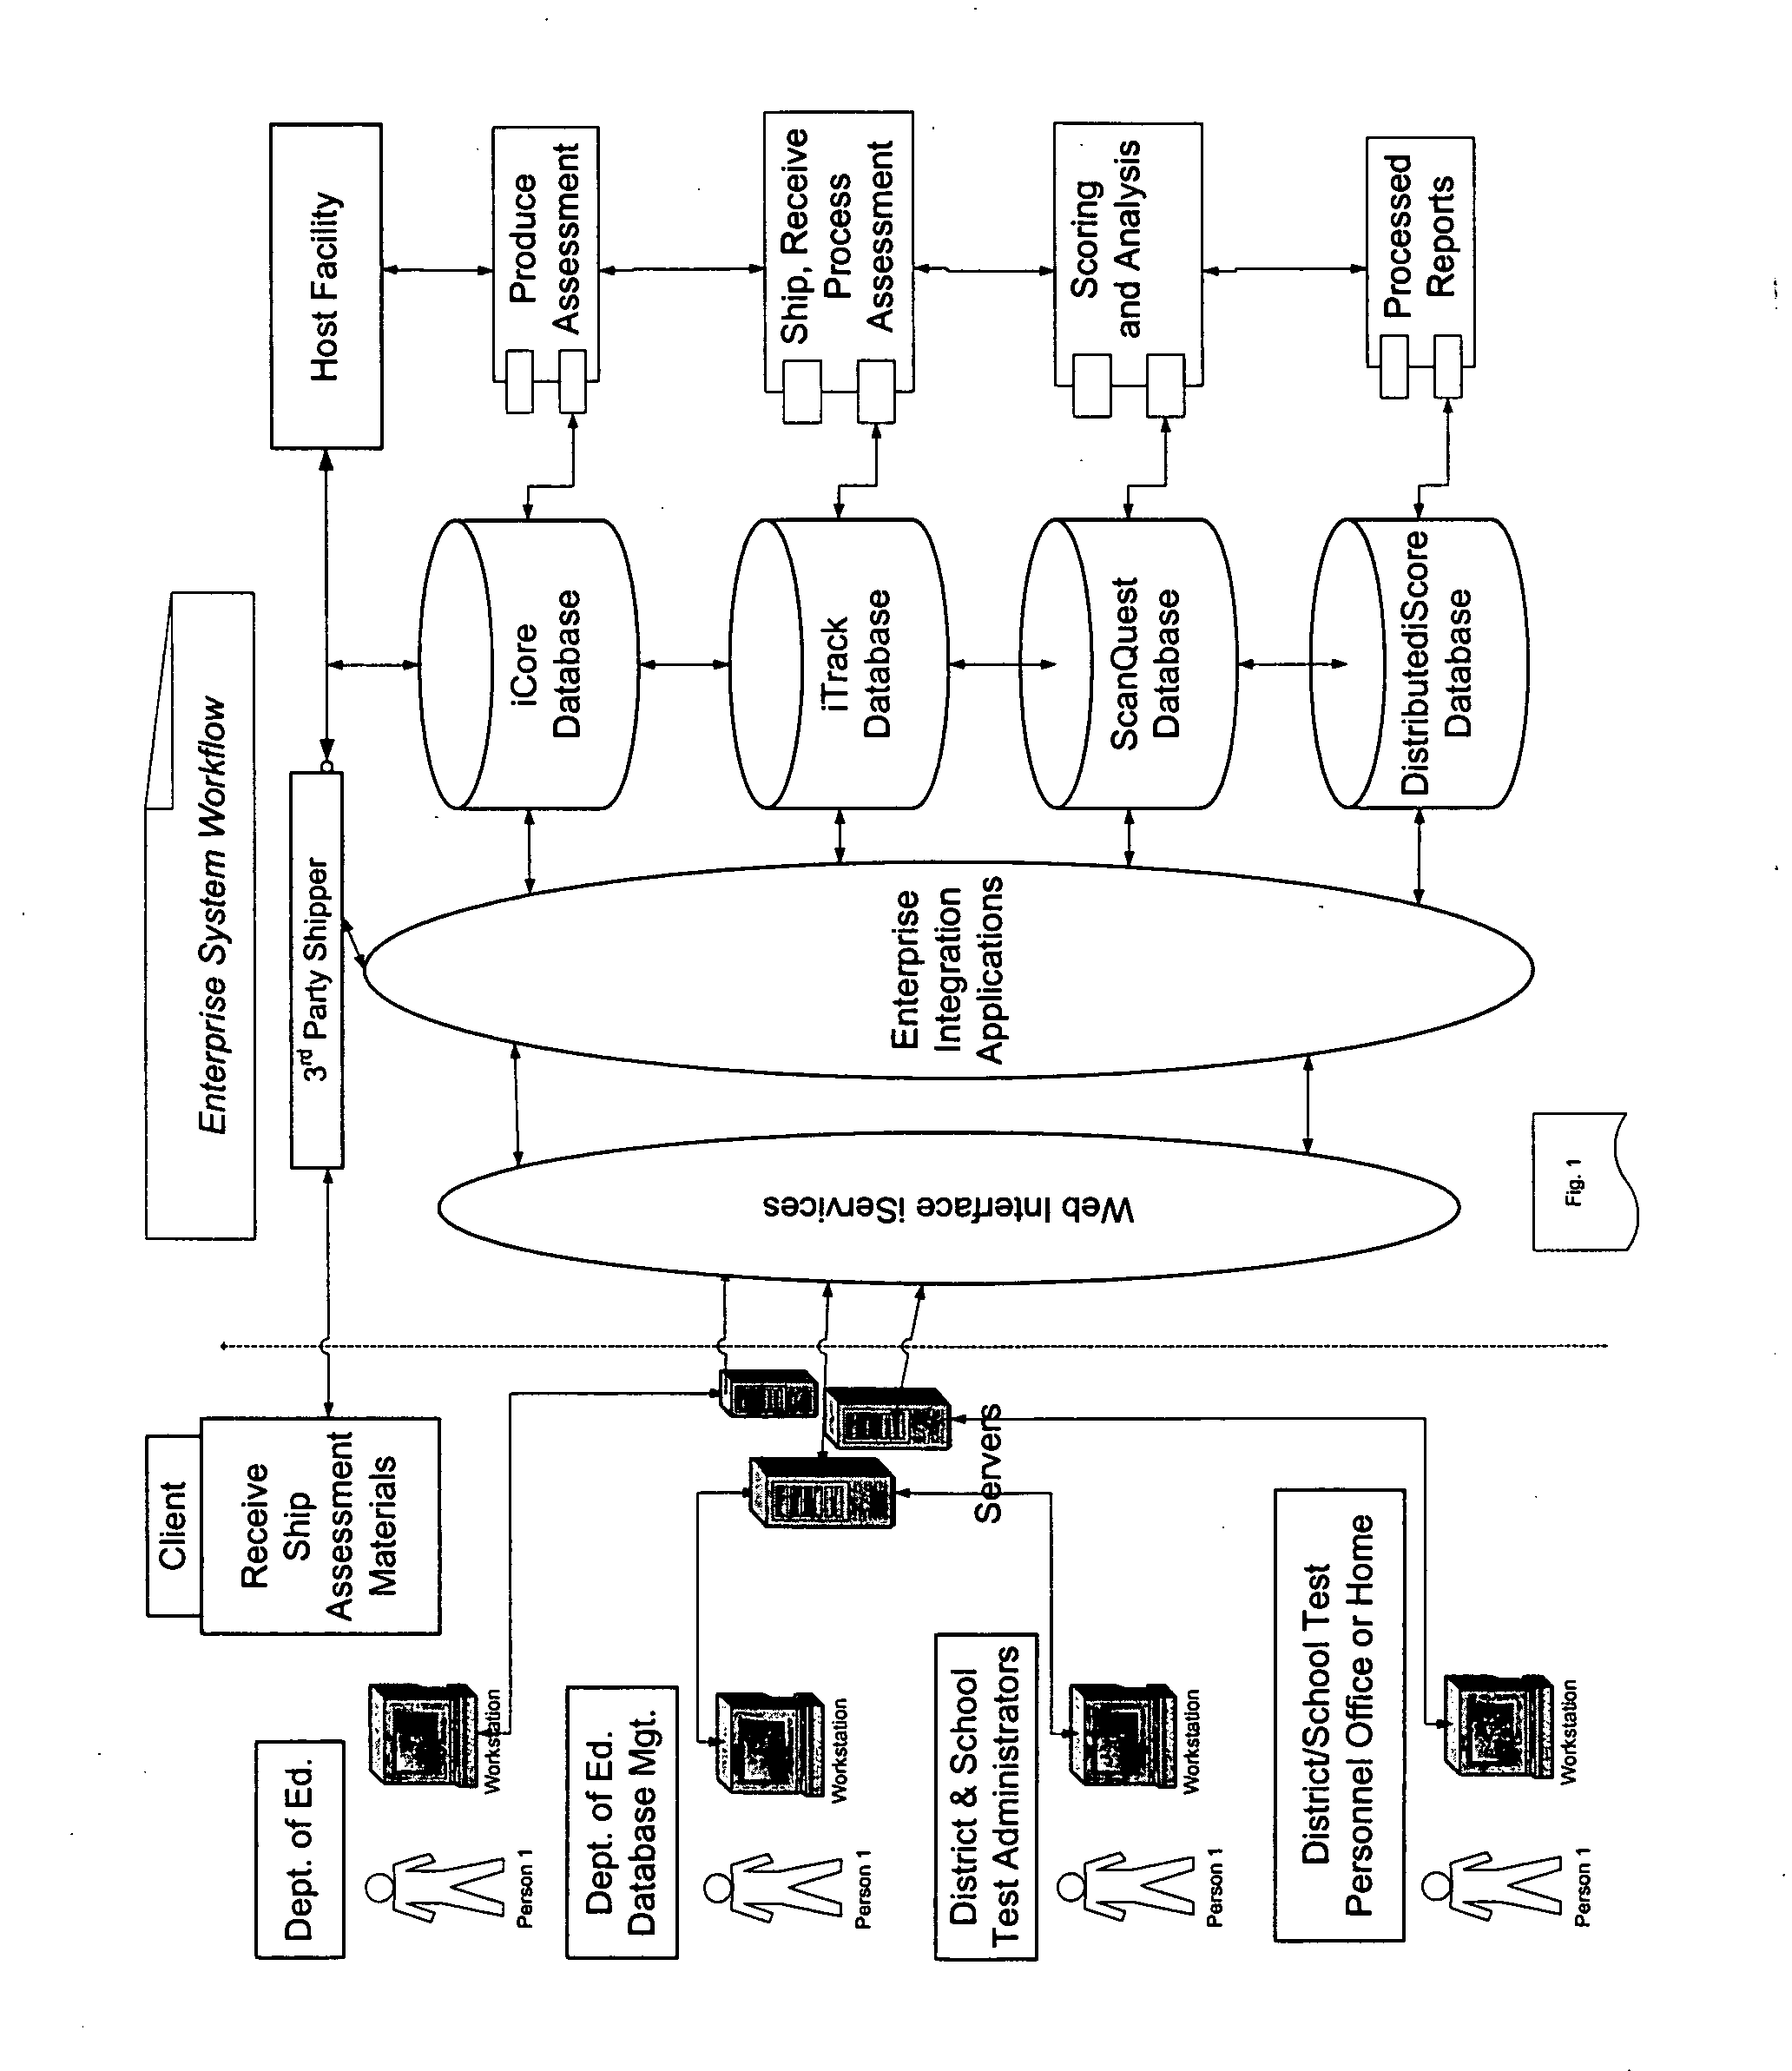 Item tracking, database management, and relational database system associated with multiple large scale test and assessment projects